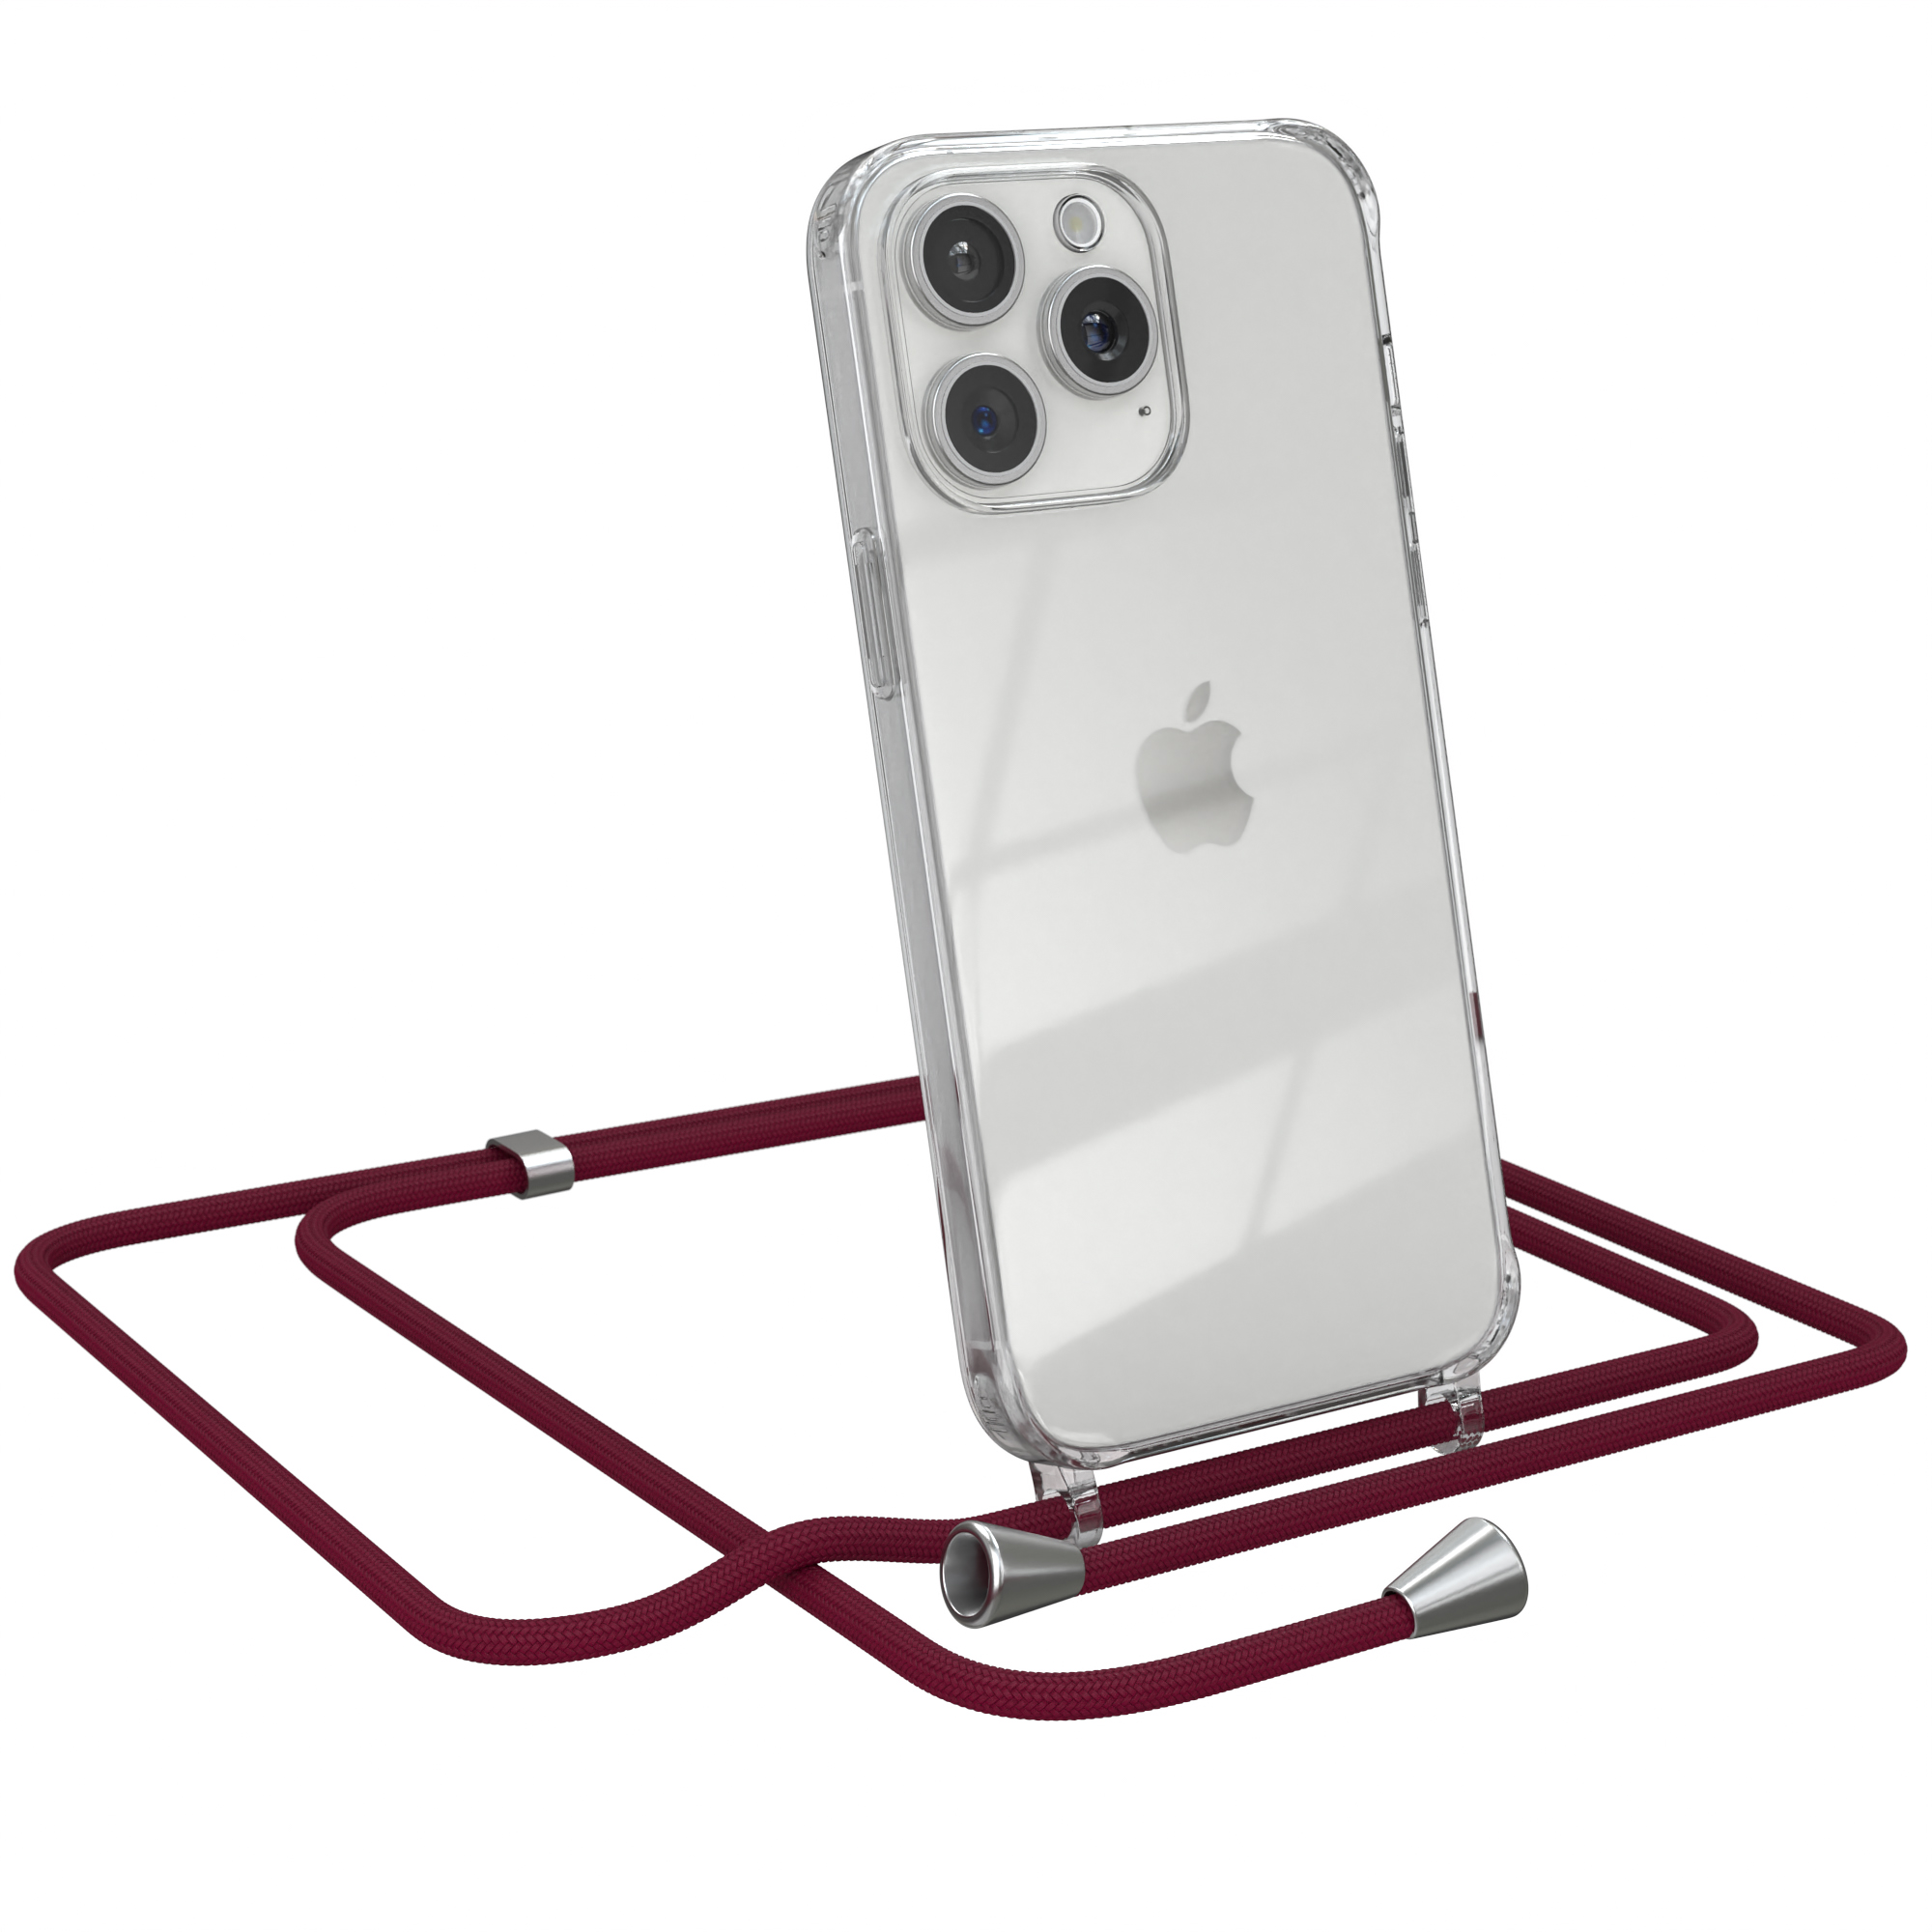 Silber CASE / Umhängeband, Clips Apple, EAZY Cover mit iPhone Umhängetasche, Rot Bordeaux Clear Pro 15 Max,